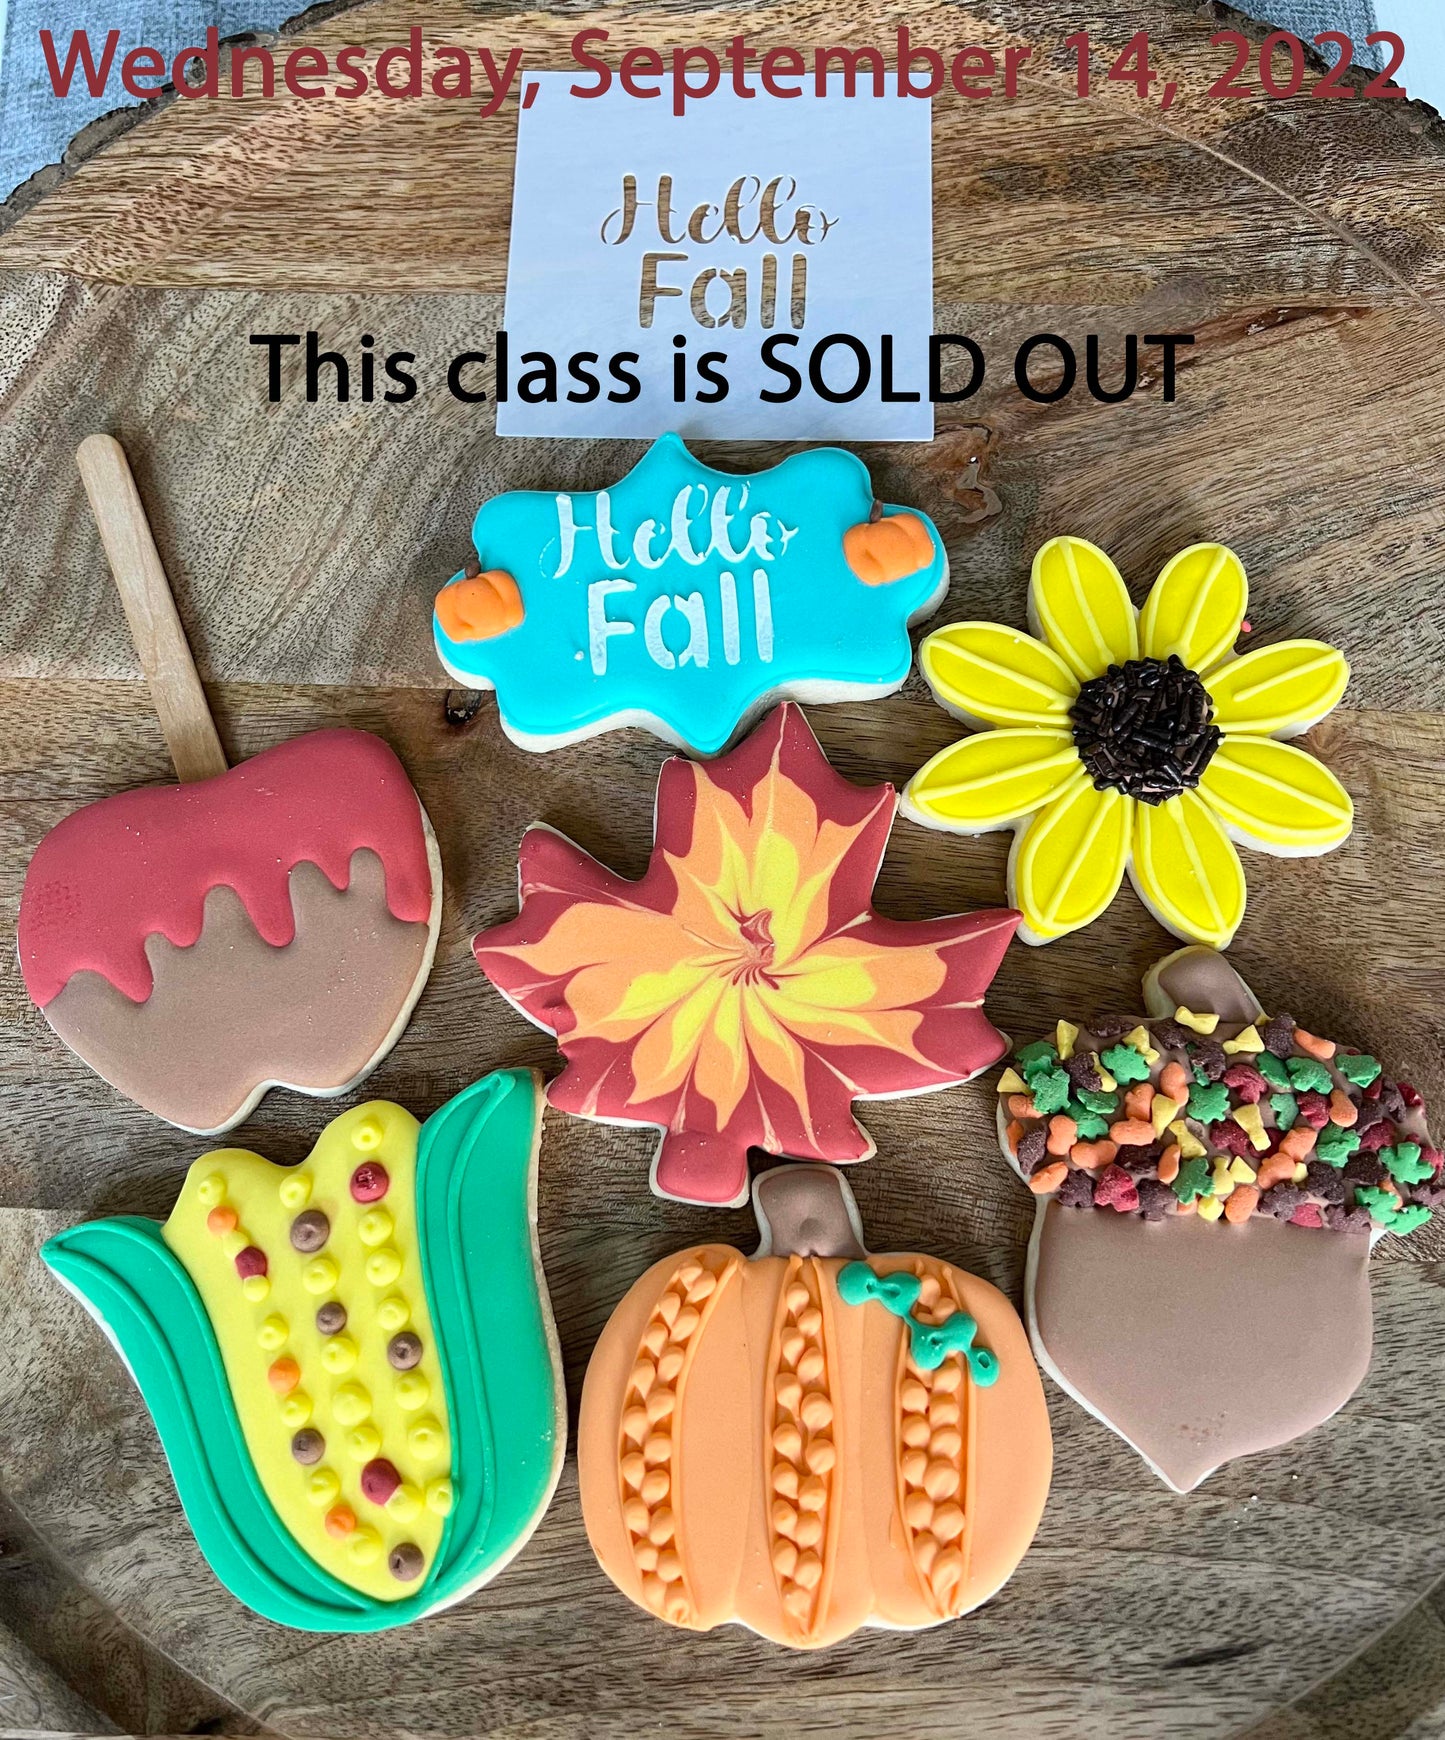 Wednesday 9/14/2022: Sugar Cookie Decorating class - Fall Theme (Please read class details below)